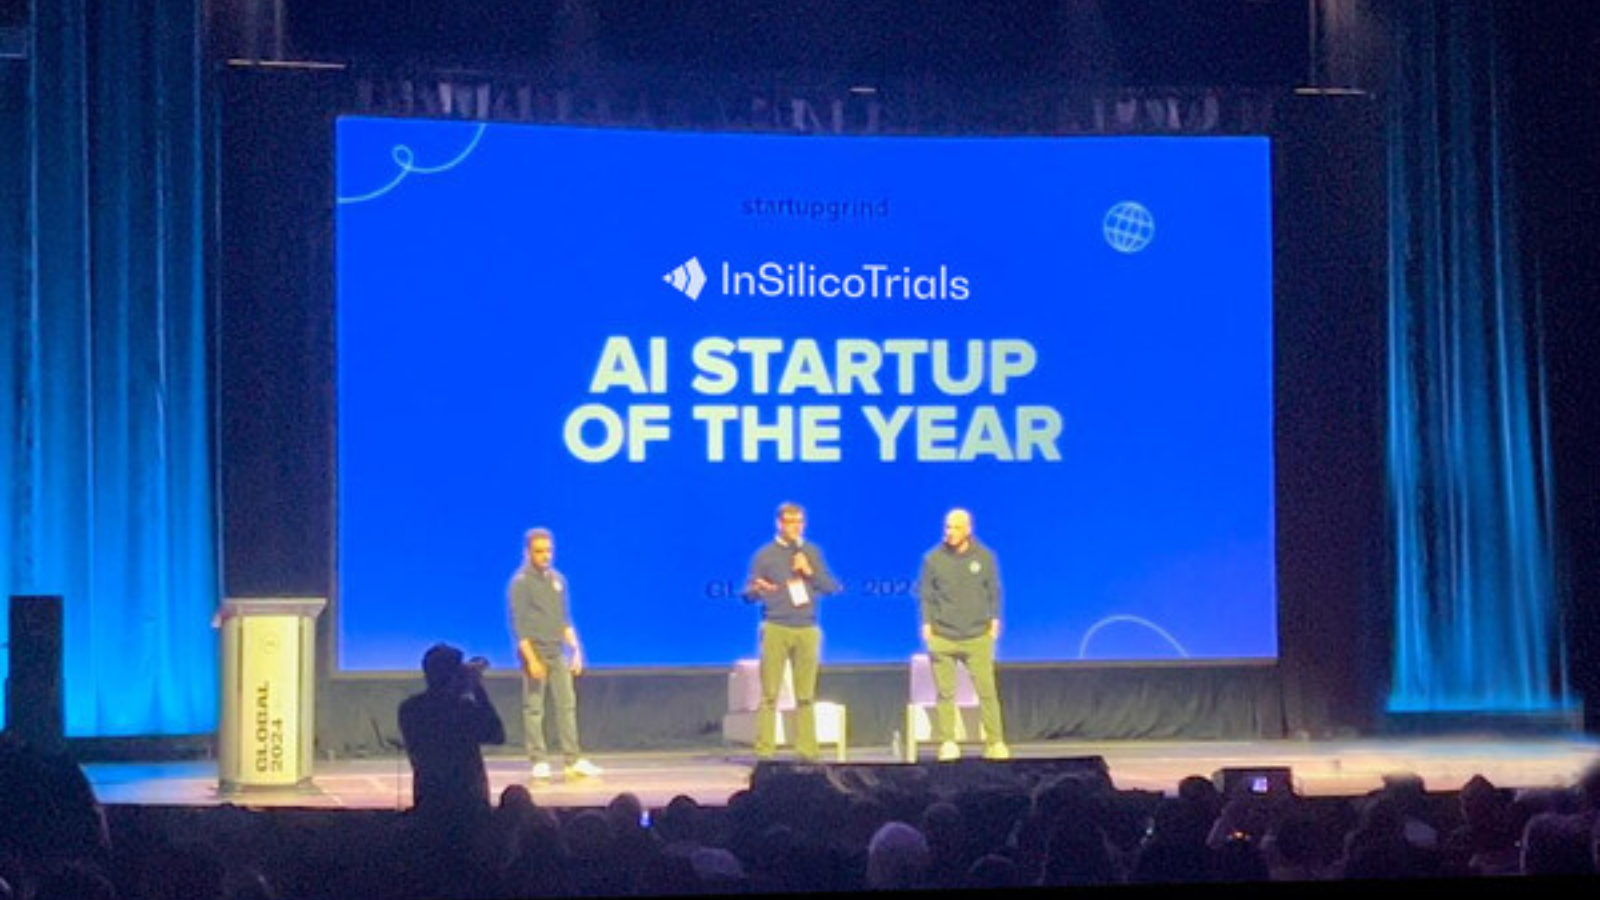 InSilicoTrials Wins AI Startup of the Year Award